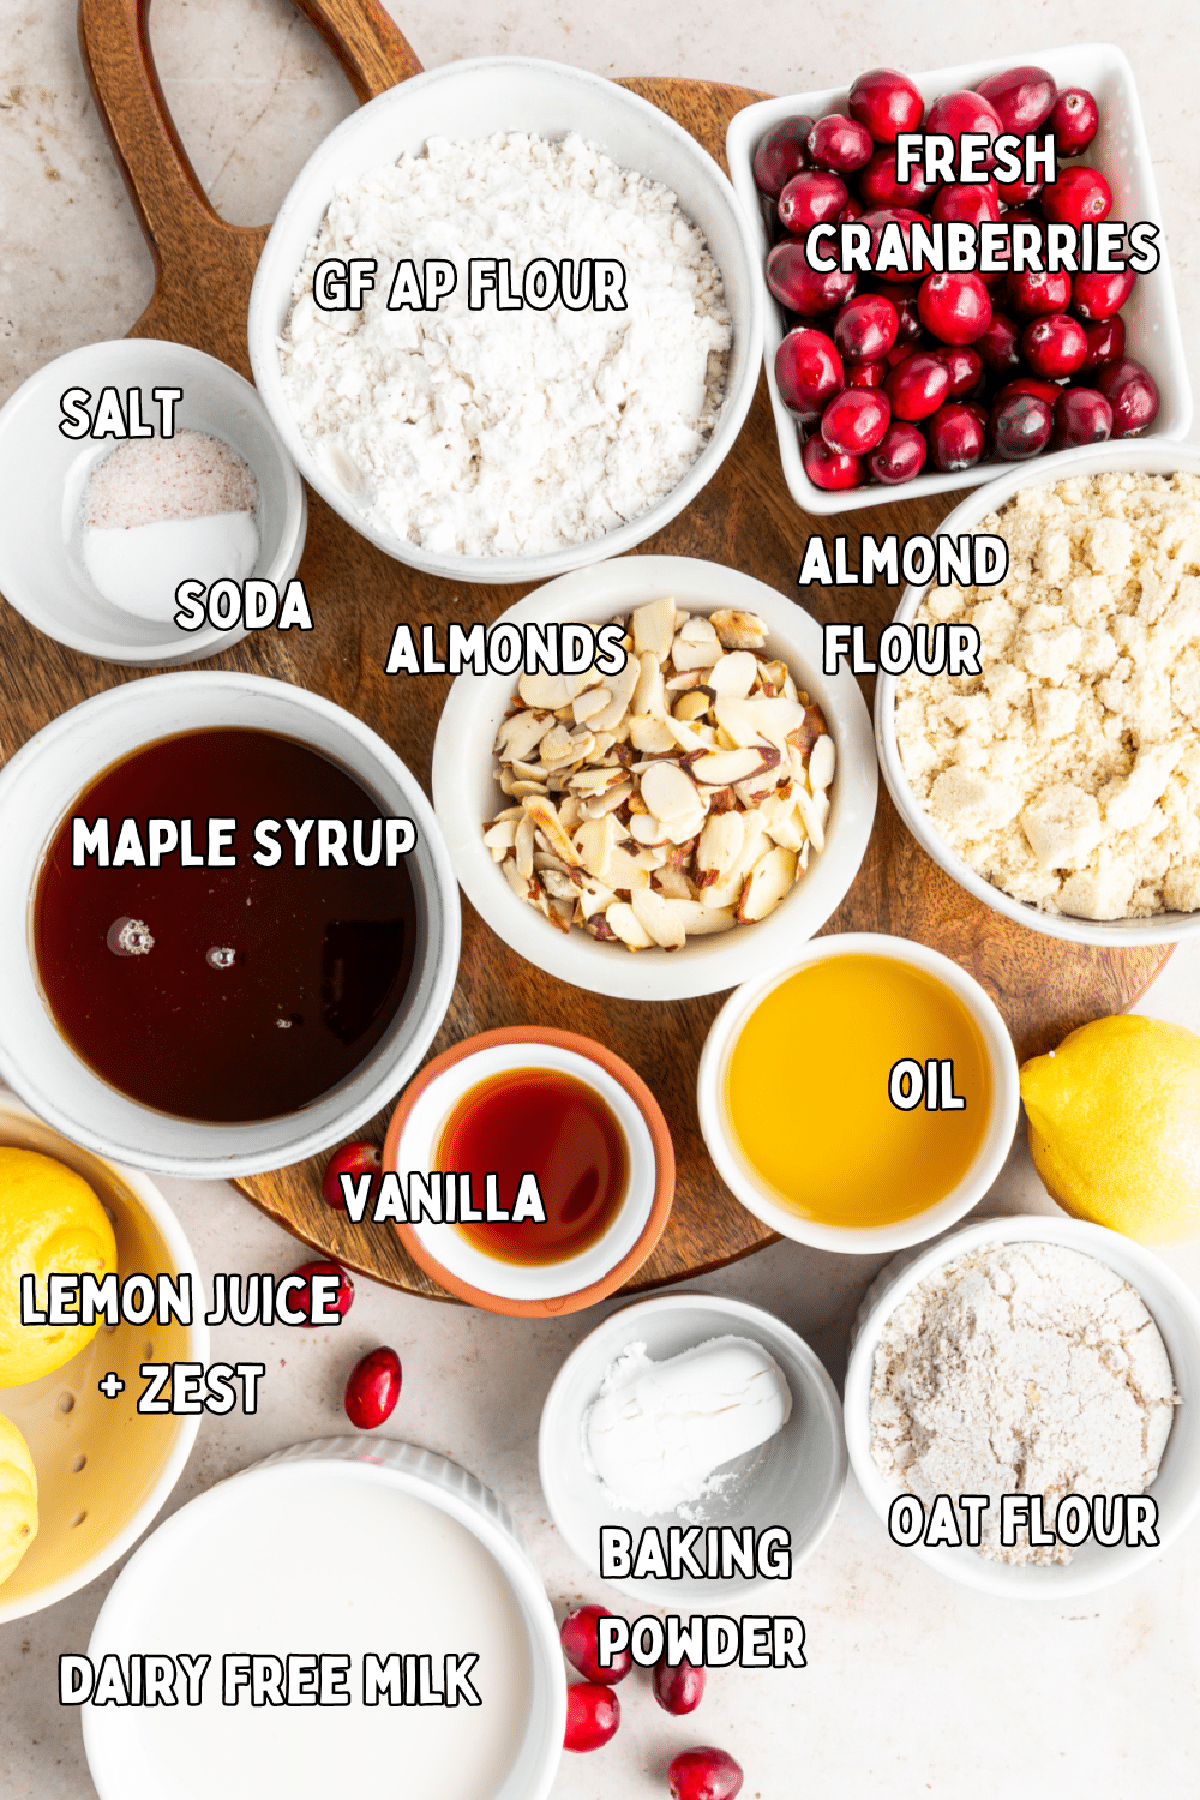 Overhead view of bowls with ingredients for cranberry lemon muffins: flours, fresh cranberries, sliced almonds, maple syrup, vanilla, oil, salt, lemon juice and zest, baking powder and soda.